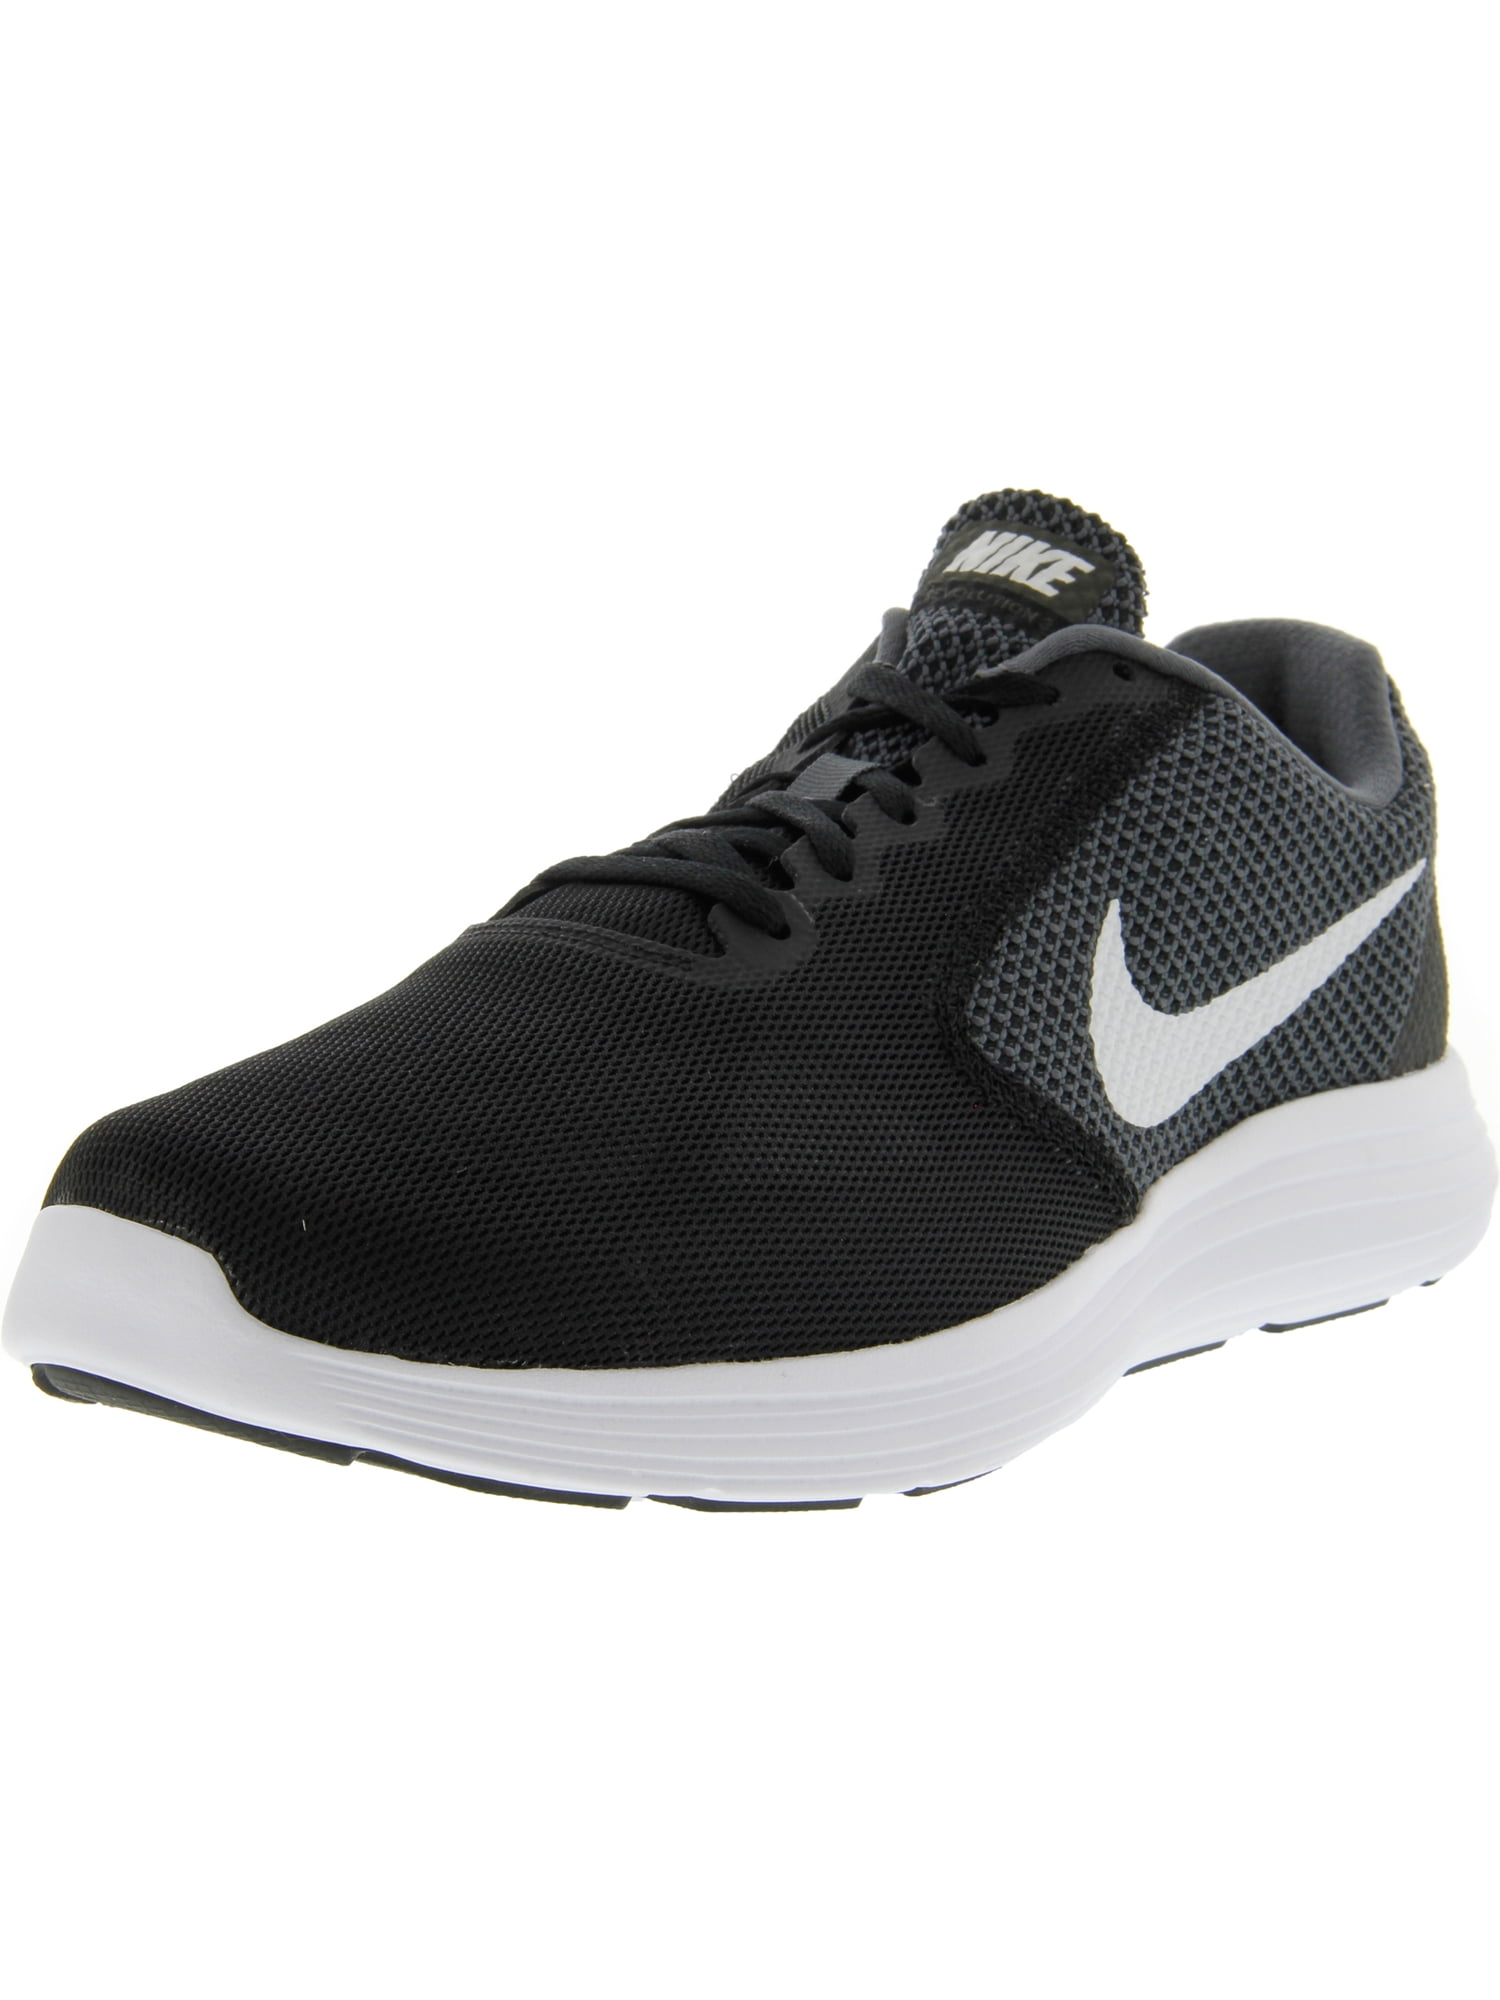 nike revolution 3 as a running shoe review